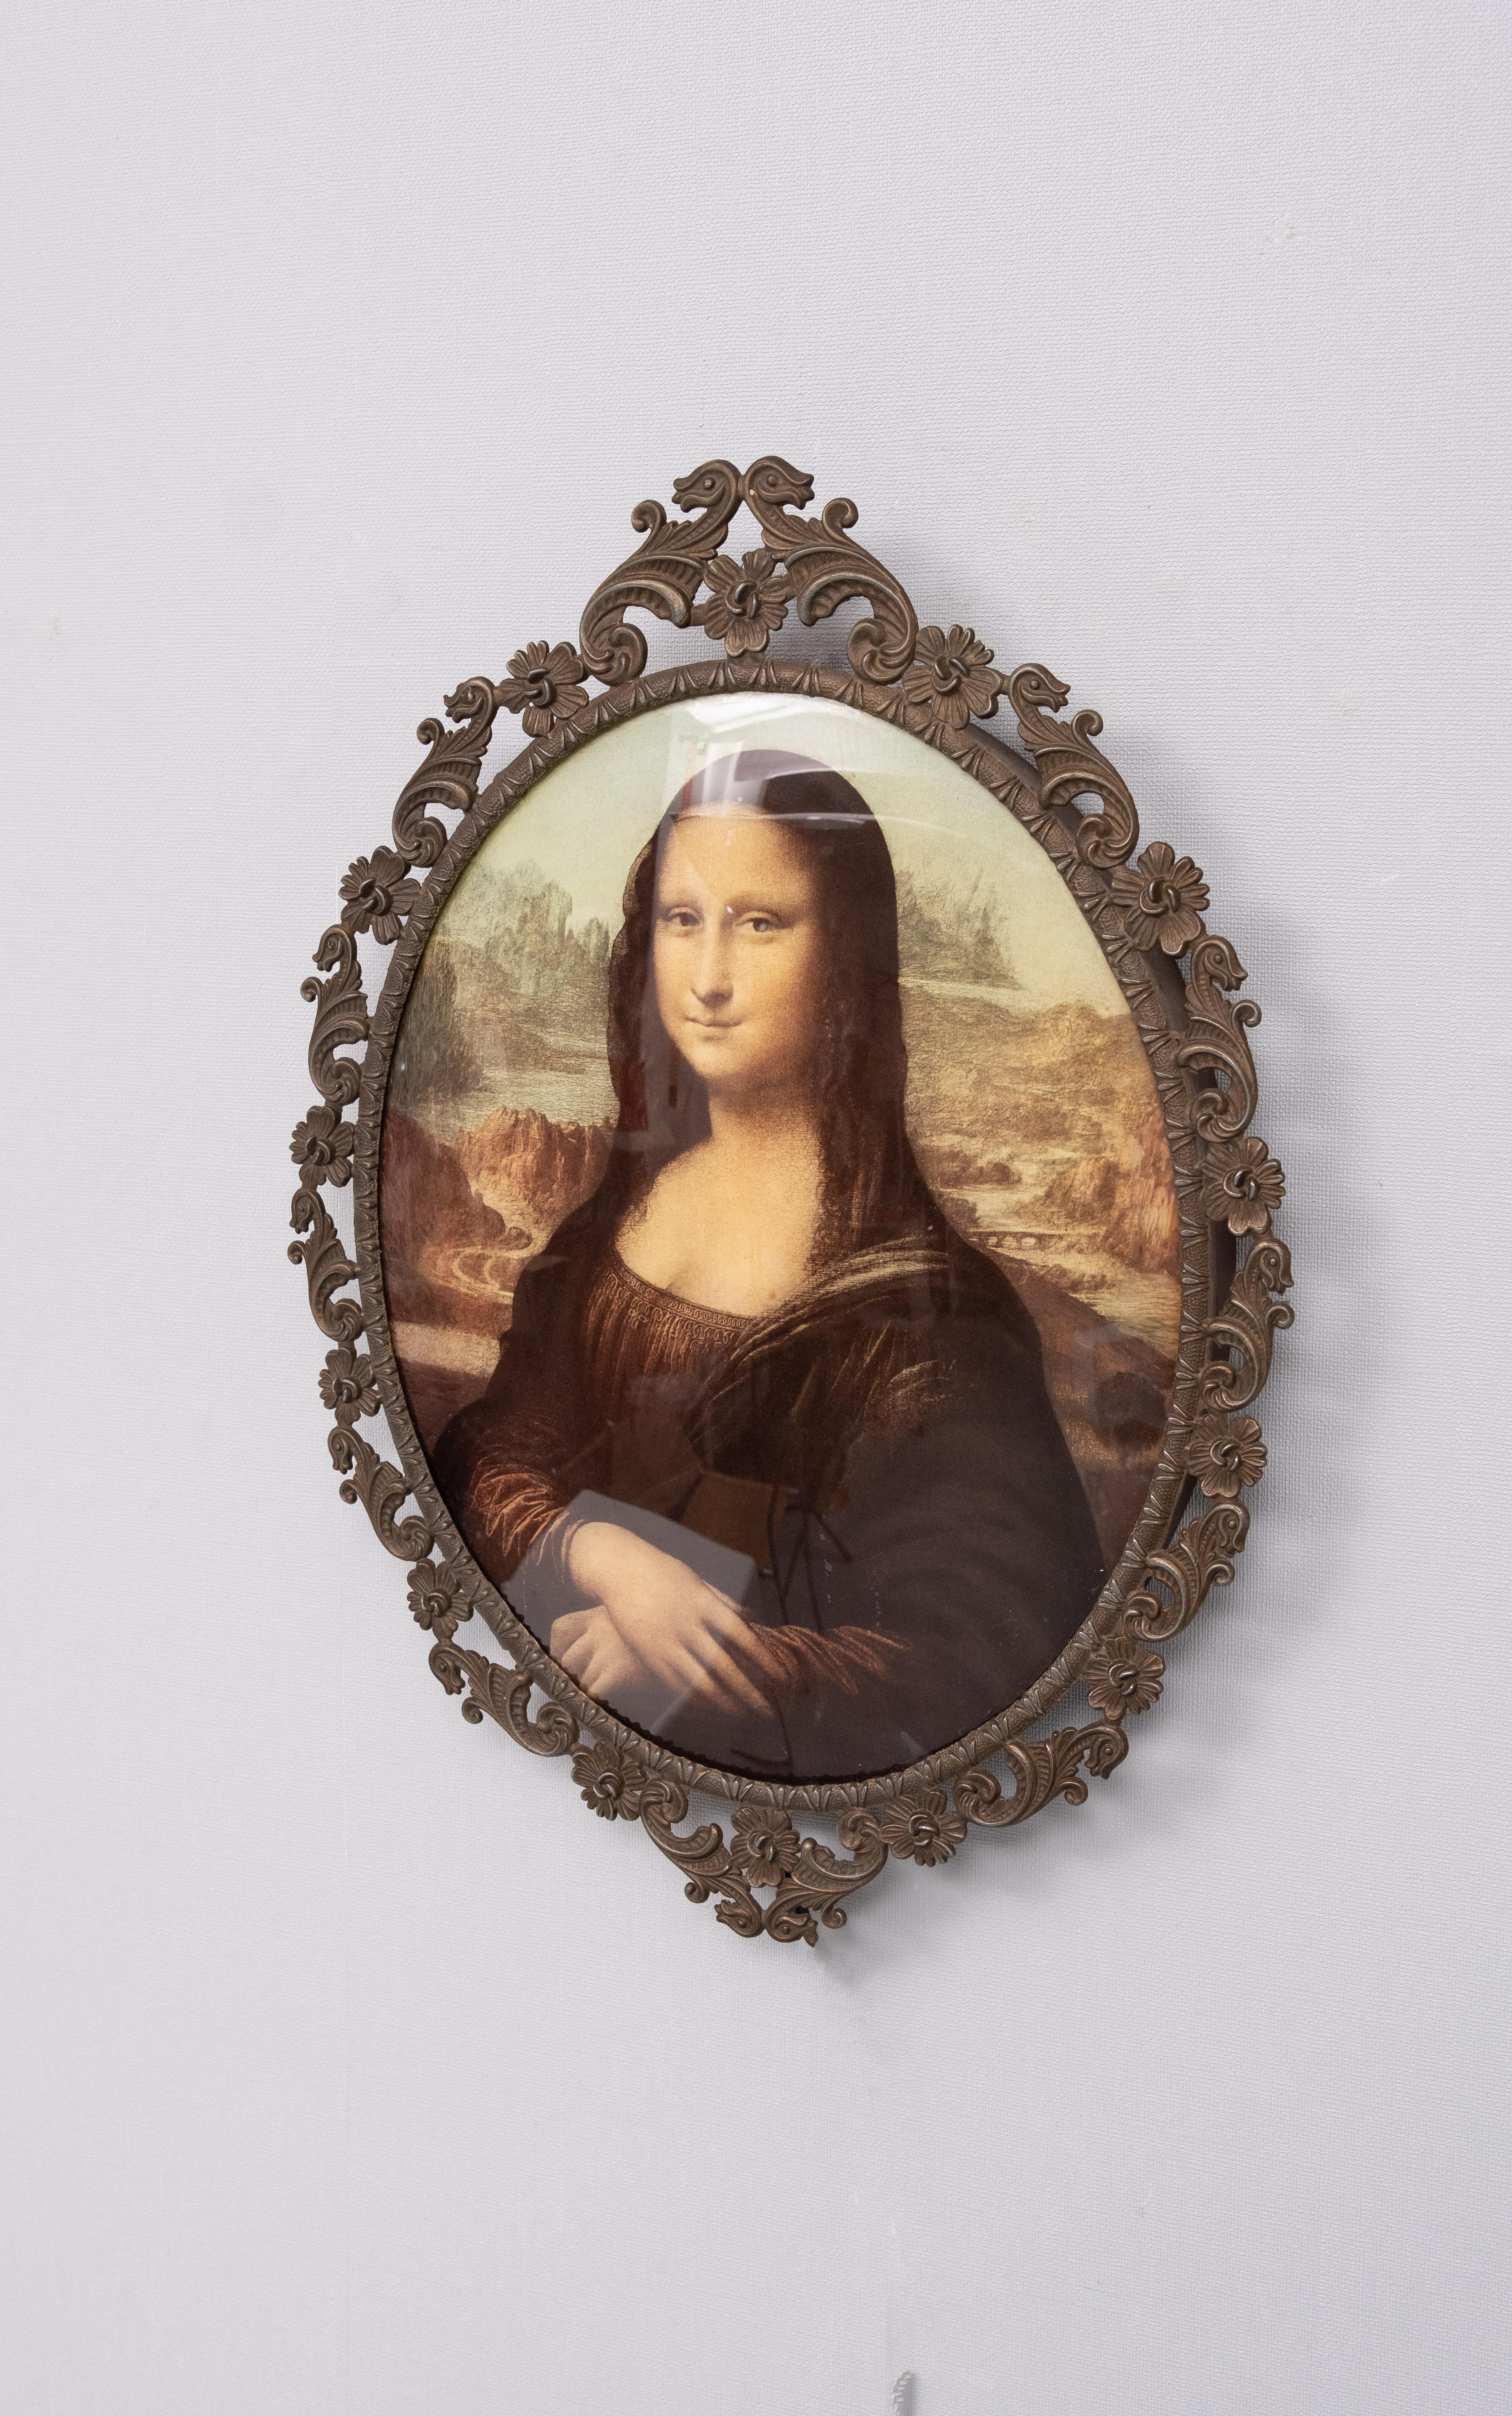 Make s me smile this oval shaped acrylic picture of the Mona Lisa .
Nice effect when Back light is on ,comes in a Brass frame . 
If you think this is kitsch  ,you are right .  Typical 1970s Italian tourist kitsch.   
Small E14 bulb needed .
